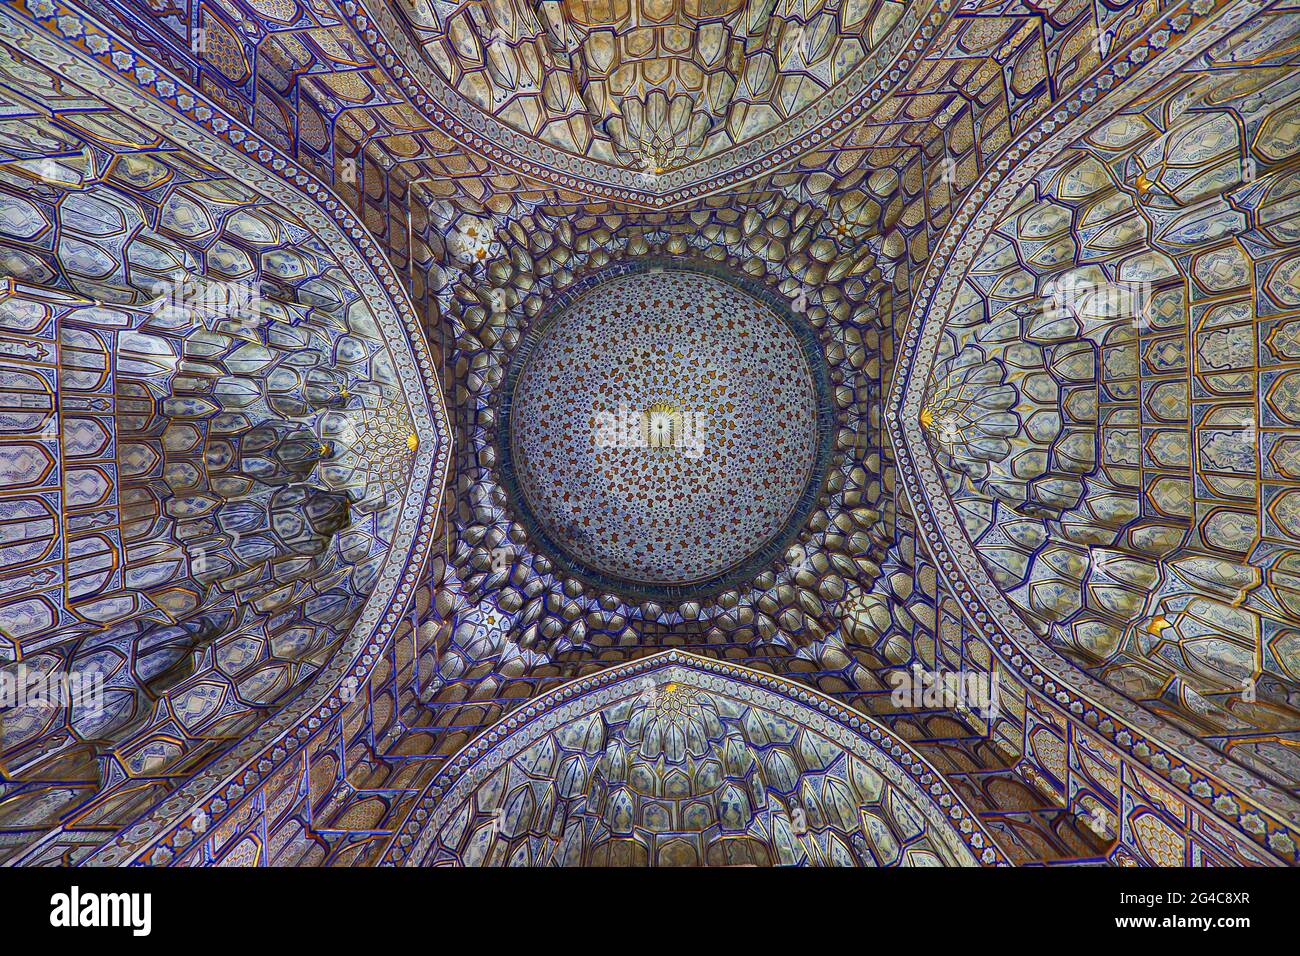 Tiled ceiling of the mausoleum building in the historical cemetery of Shahi Zinda in Samarkand, Uzbekistan Stock Photo